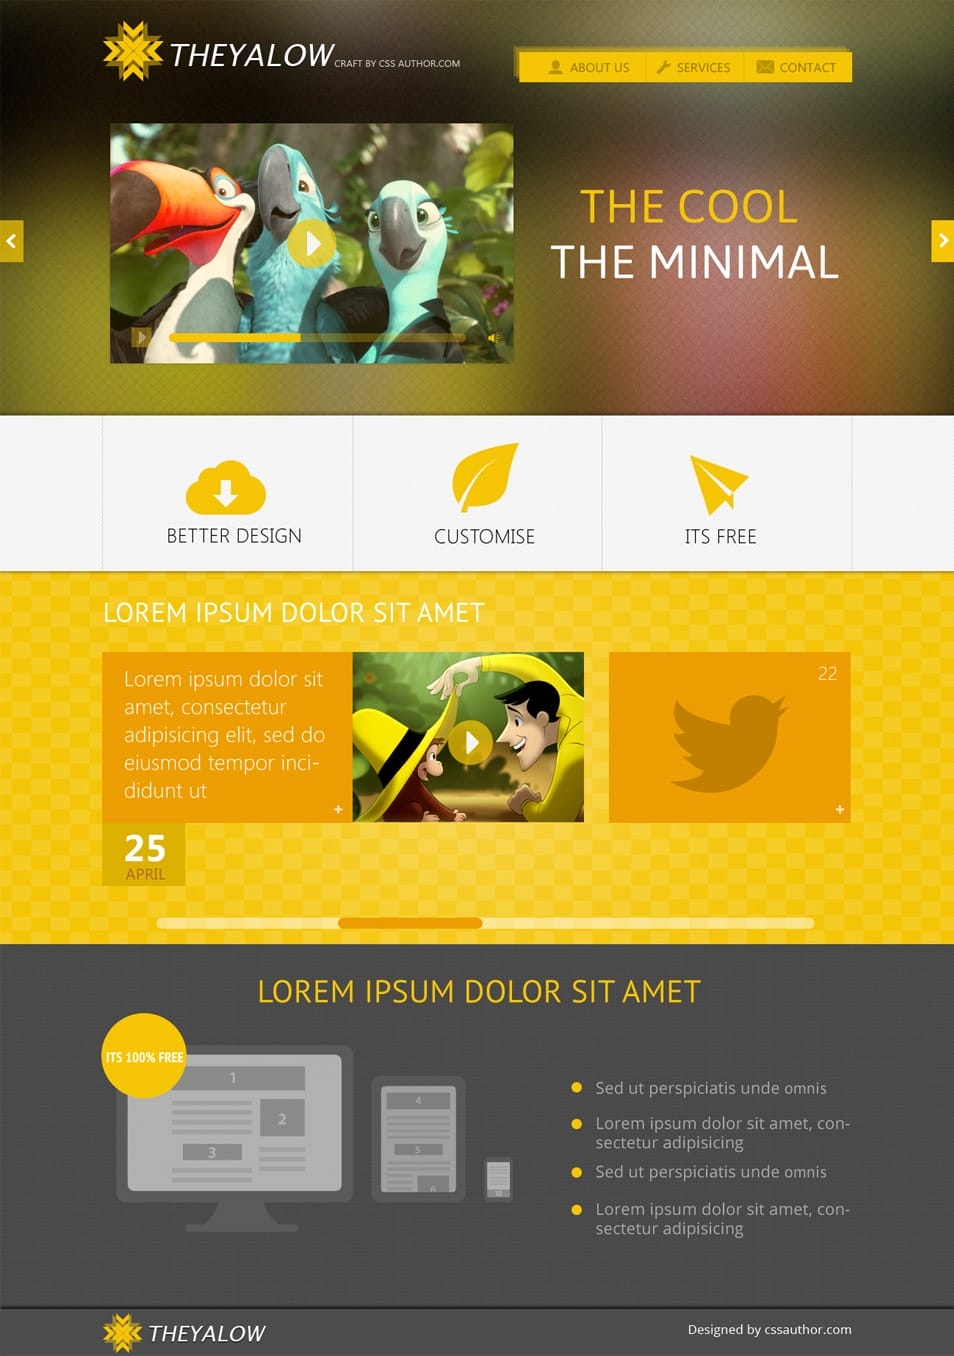 THEYALOW  A Responsive Web Design Template PSD